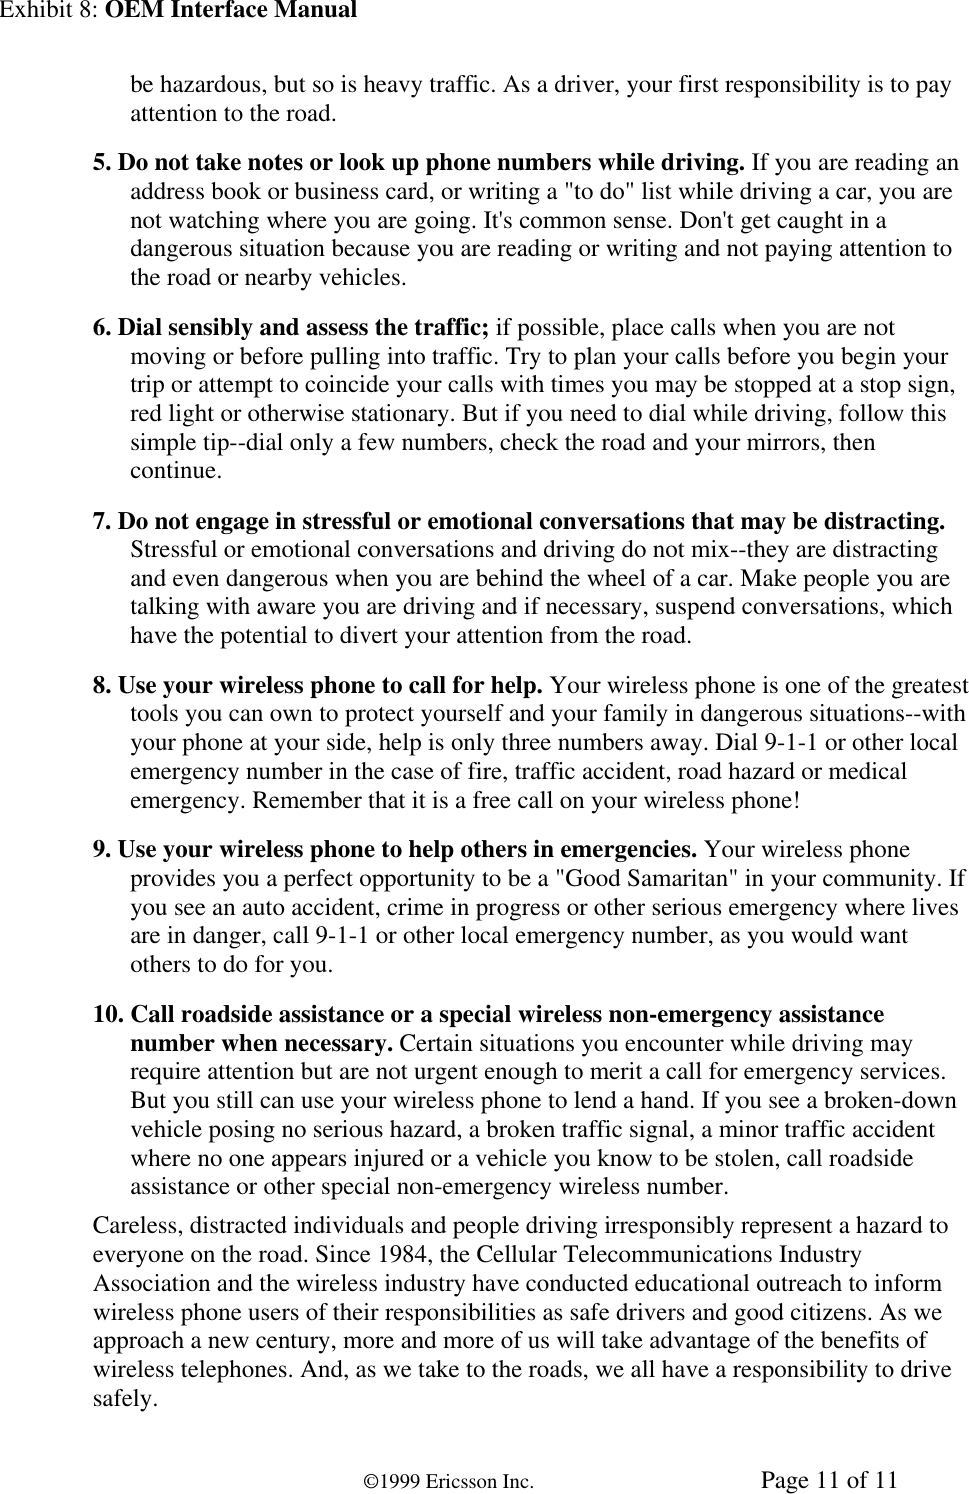 Exhibit 8: OEM Interface Manual©1999 Ericsson Inc. Page 11 of 11be hazardous, but so is heavy traffic. As a driver, your first responsibility is to payattention to the road.5. Do not take notes or look up phone numbers while driving. If you are reading anaddress book or business card, or writing a &quot;to do&quot; list while driving a car, you arenot watching where you are going. It&apos;s common sense. Don&apos;t get caught in adangerous situation because you are reading or writing and not paying attention tothe road or nearby vehicles.6. Dial sensibly and assess the traffic; if possible, place calls when you are notmoving or before pulling into traffic. Try to plan your calls before you begin yourtrip or attempt to coincide your calls with times you may be stopped at a stop sign,red light or otherwise stationary. But if you need to dial while driving, follow thissimple tip--dial only a few numbers, check the road and your mirrors, thencontinue.7. Do not engage in stressful or emotional conversations that may be distracting.Stressful or emotional conversations and driving do not mix--they are distractingand even dangerous when you are behind the wheel of a car. Make people you aretalking with aware you are driving and if necessary, suspend conversations, whichhave the potential to divert your attention from the road.8. Use your wireless phone to call for help. Your wireless phone is one of the greatesttools you can own to protect yourself and your family in dangerous situations--withyour phone at your side, help is only three numbers away. Dial 9-1-1 or other localemergency number in the case of fire, traffic accident, road hazard or medicalemergency. Remember that it is a free call on your wireless phone!9. Use your wireless phone to help others in emergencies. Your wireless phoneprovides you a perfect opportunity to be a &quot;Good Samaritan&quot; in your community. Ifyou see an auto accident, crime in progress or other serious emergency where livesare in danger, call 9-1-1 or other local emergency number, as you would wantothers to do for you.10. Call roadside assistance or a special wireless non-emergency assistancenumber when necessary. Certain situations you encounter while driving mayrequire attention but are not urgent enough to merit a call for emergency services.But you still can use your wireless phone to lend a hand. If you see a broken-downvehicle posing no serious hazard, a broken traffic signal, a minor traffic accidentwhere no one appears injured or a vehicle you know to be stolen, call roadsideassistance or other special non-emergency wireless number.Careless, distracted individuals and people driving irresponsibly represent a hazard toeveryone on the road. Since 1984, the Cellular Telecommunications IndustryAssociation and the wireless industry have conducted educational outreach to informwireless phone users of their responsibilities as safe drivers and good citizens. As weapproach a new century, more and more of us will take advantage of the benefits ofwireless telephones. And, as we take to the roads, we all have a responsibility to drivesafely.